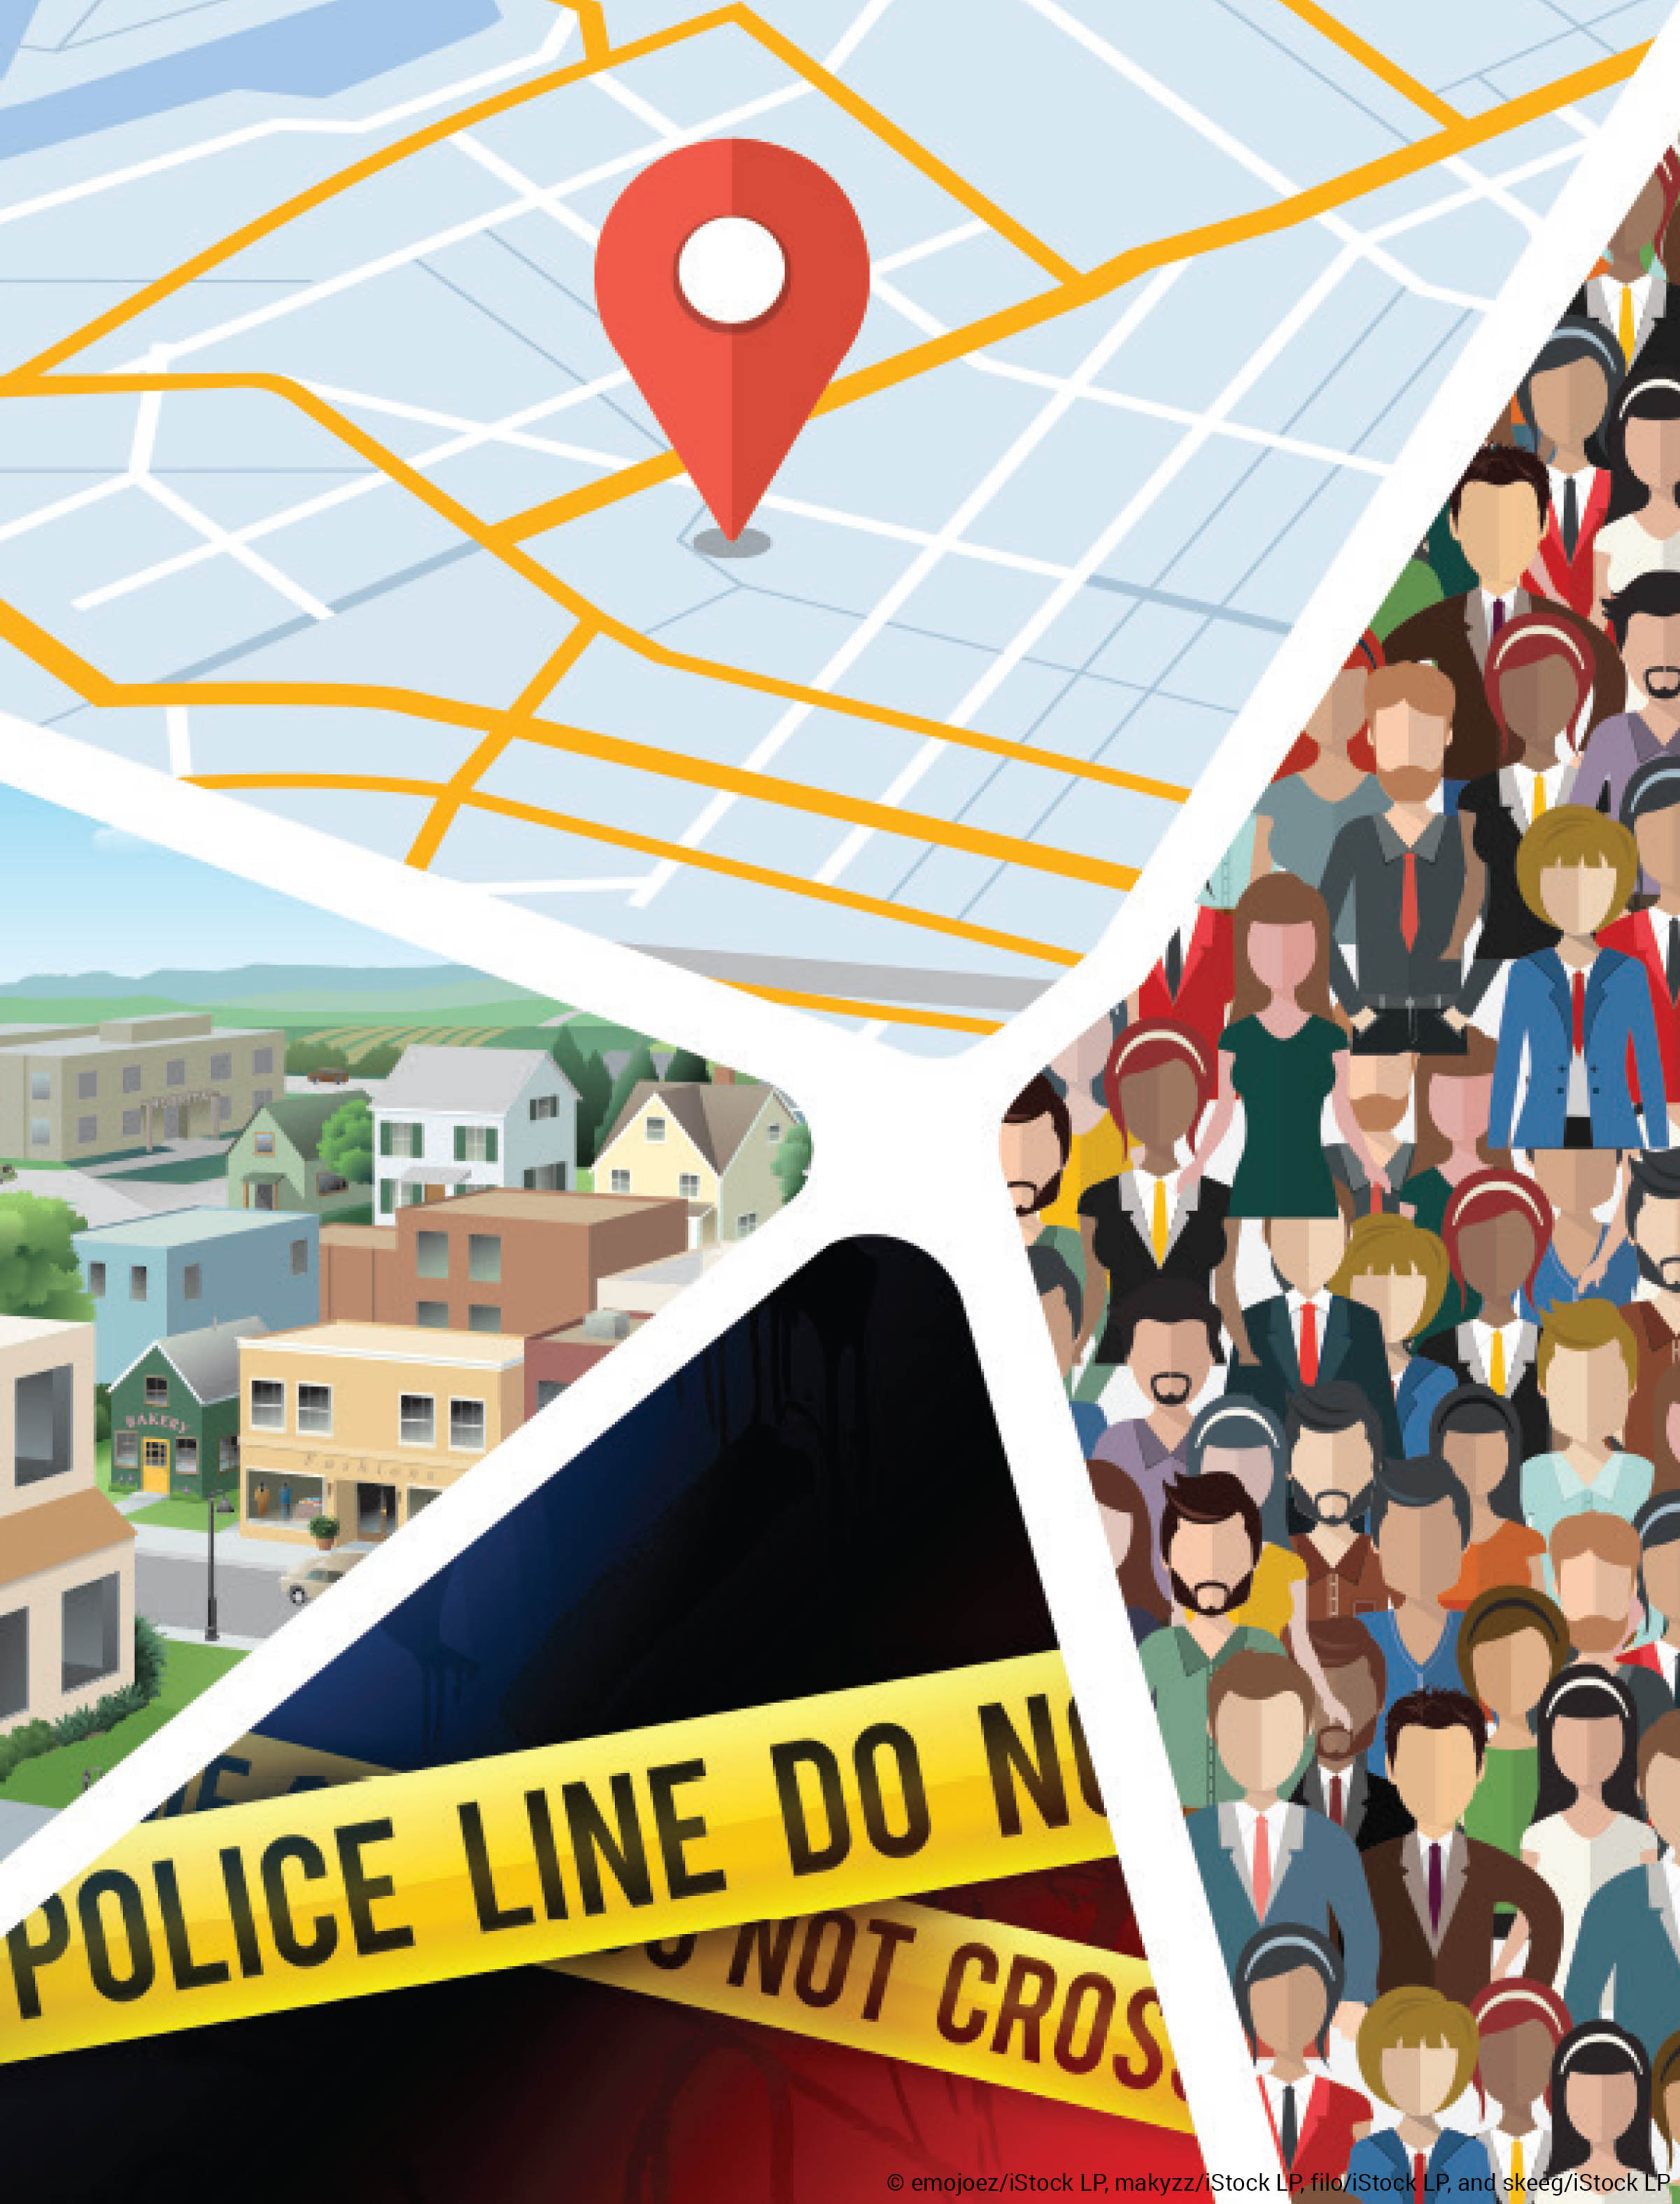 Illustration of map, buildings, a crowd, and police line tape